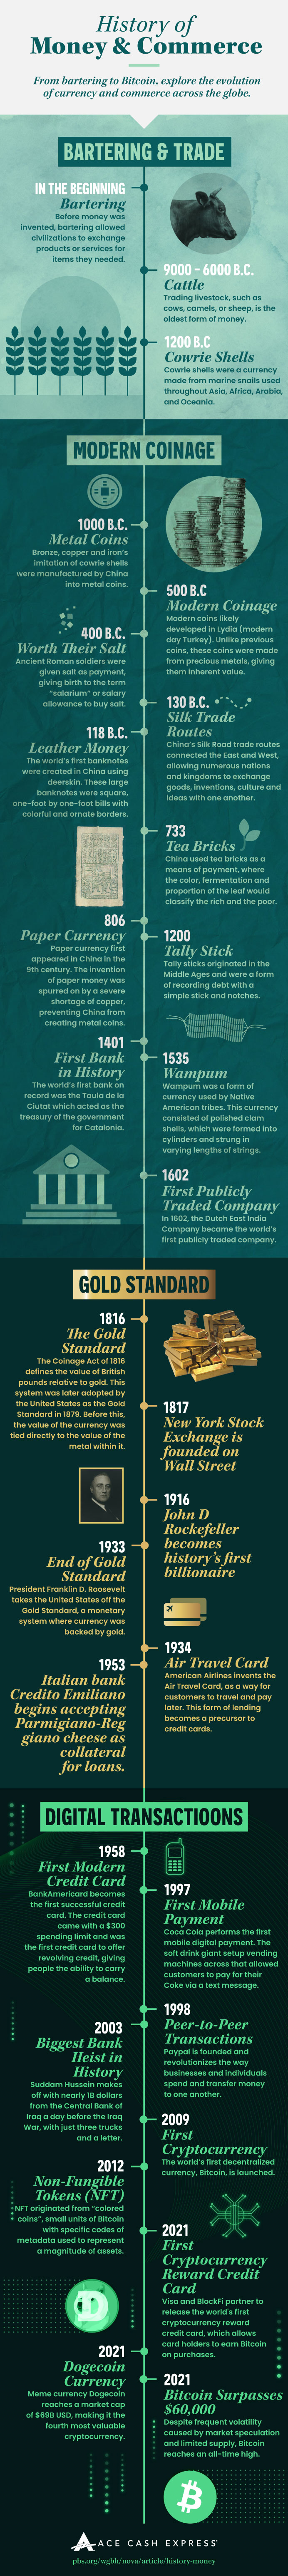 History of Money & Commerce: From Bartering to Bitcoin  Infographic